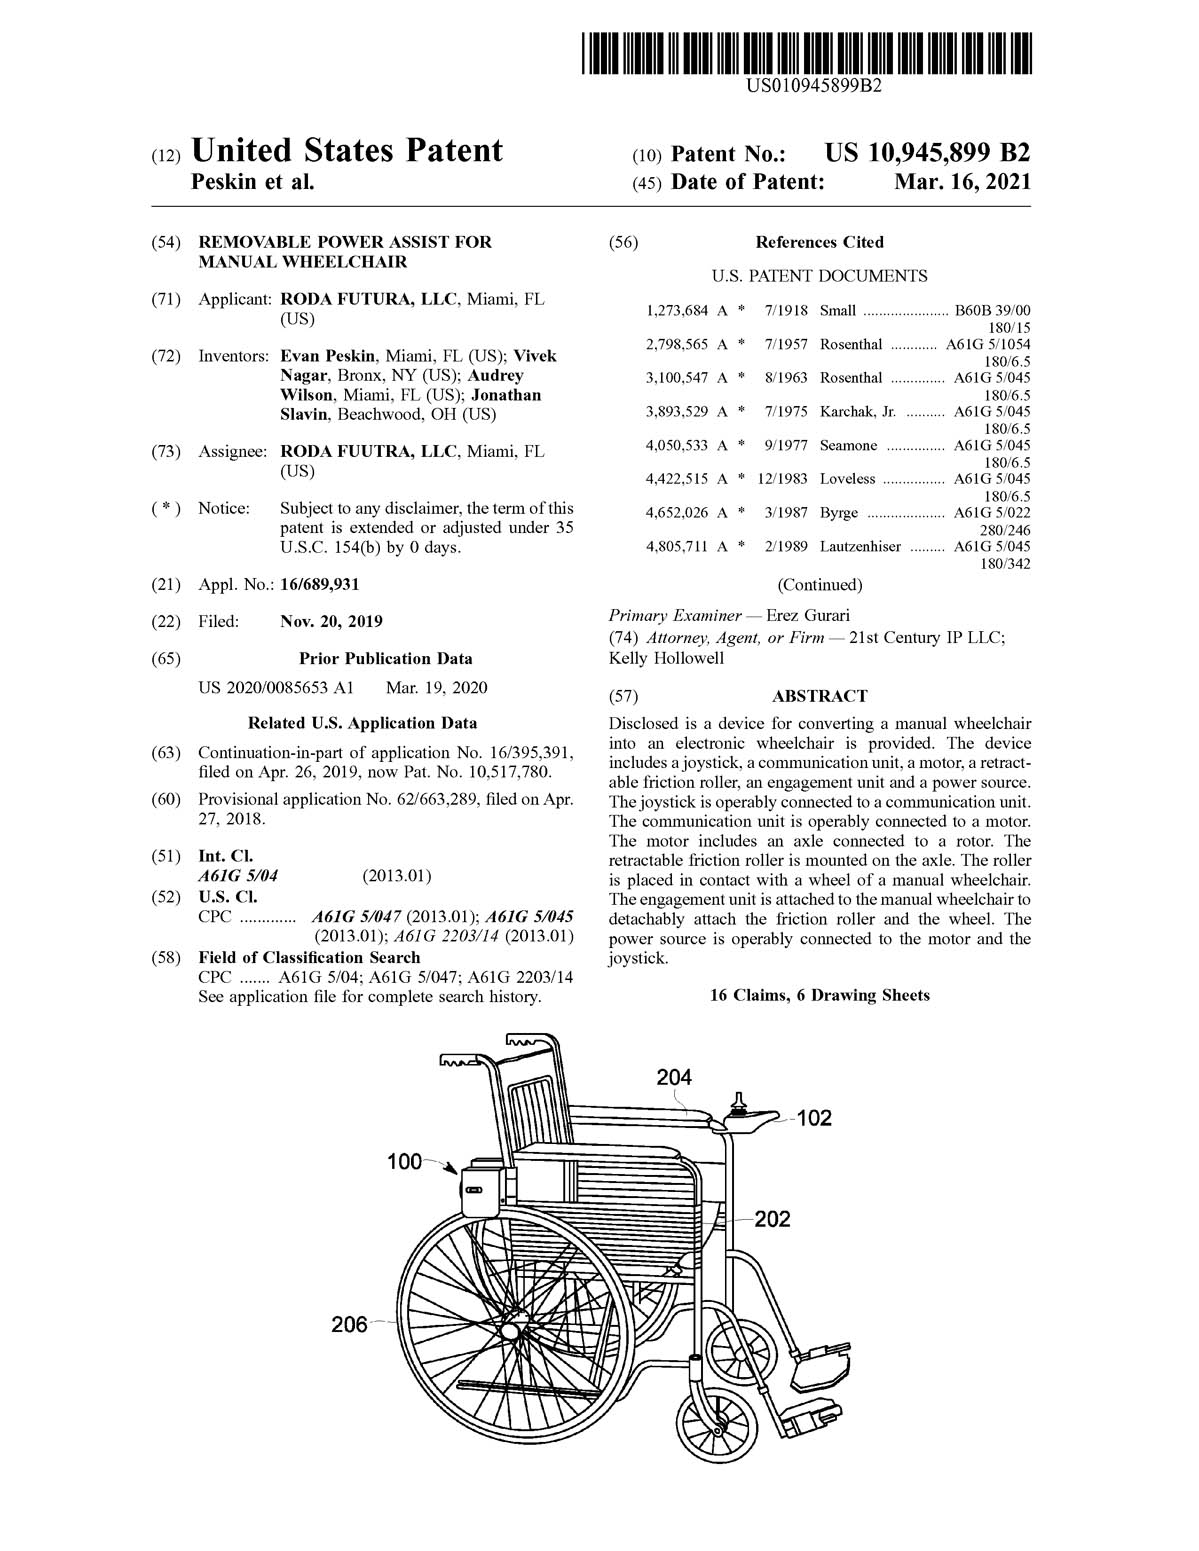 Medical Device Patents